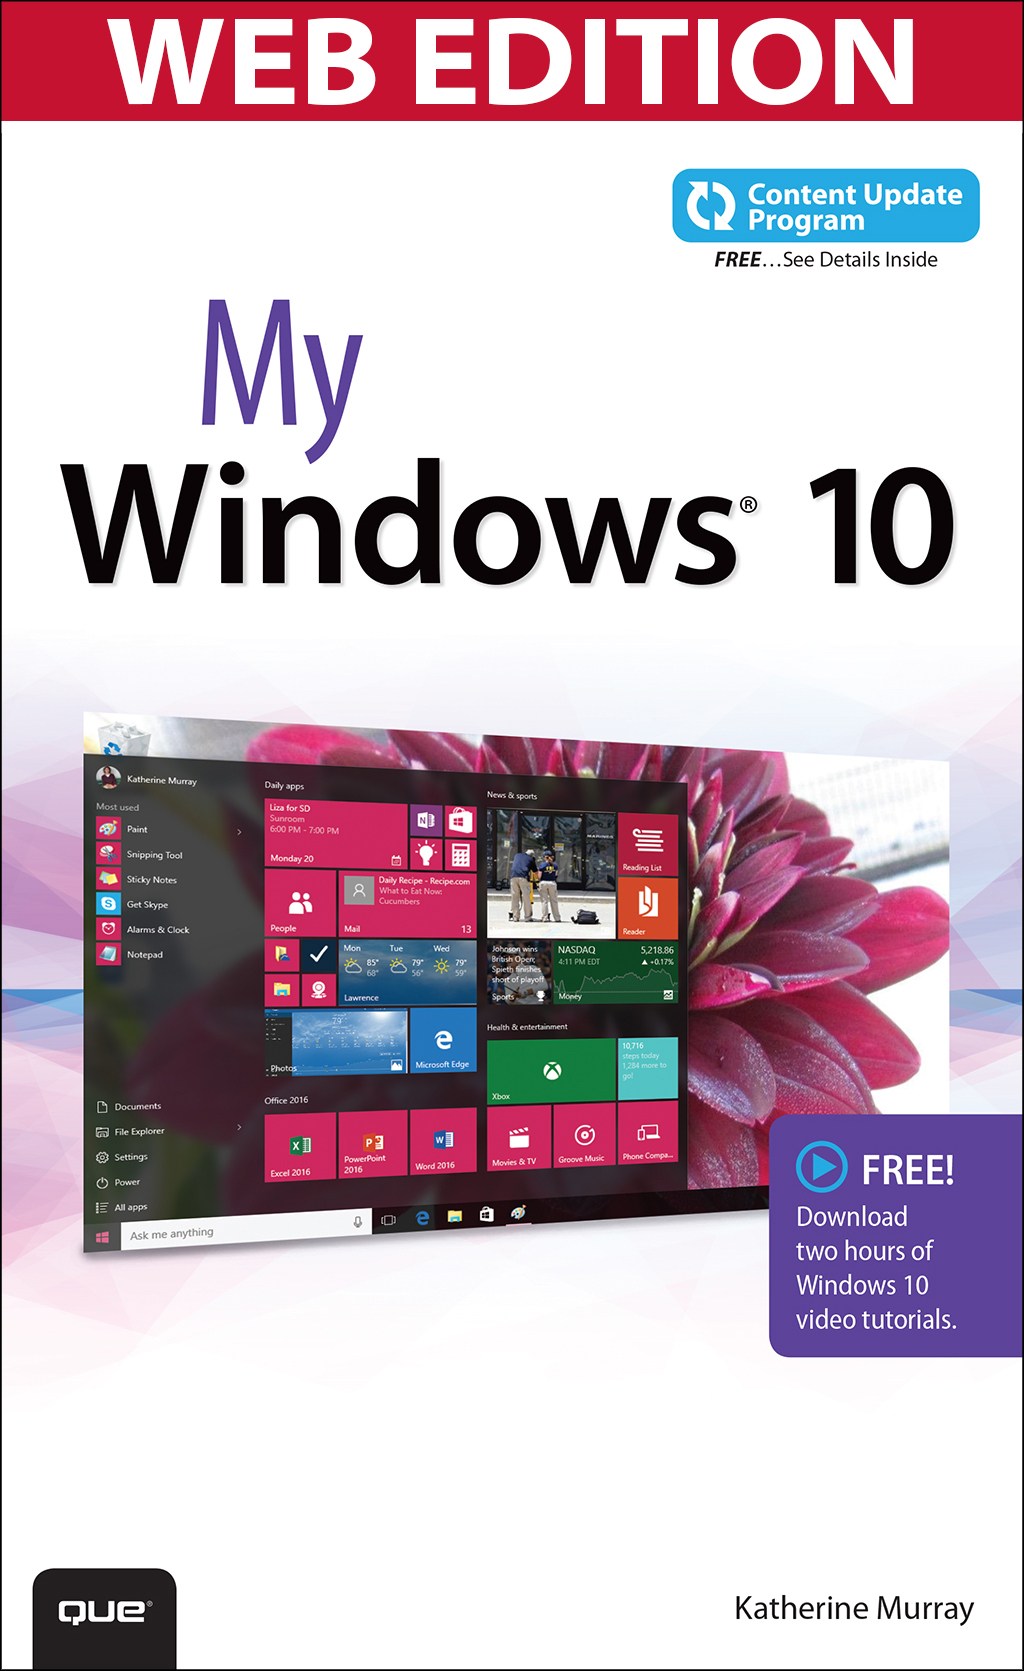 My Windows 10 (Web Edition with Video and Content Update Program)